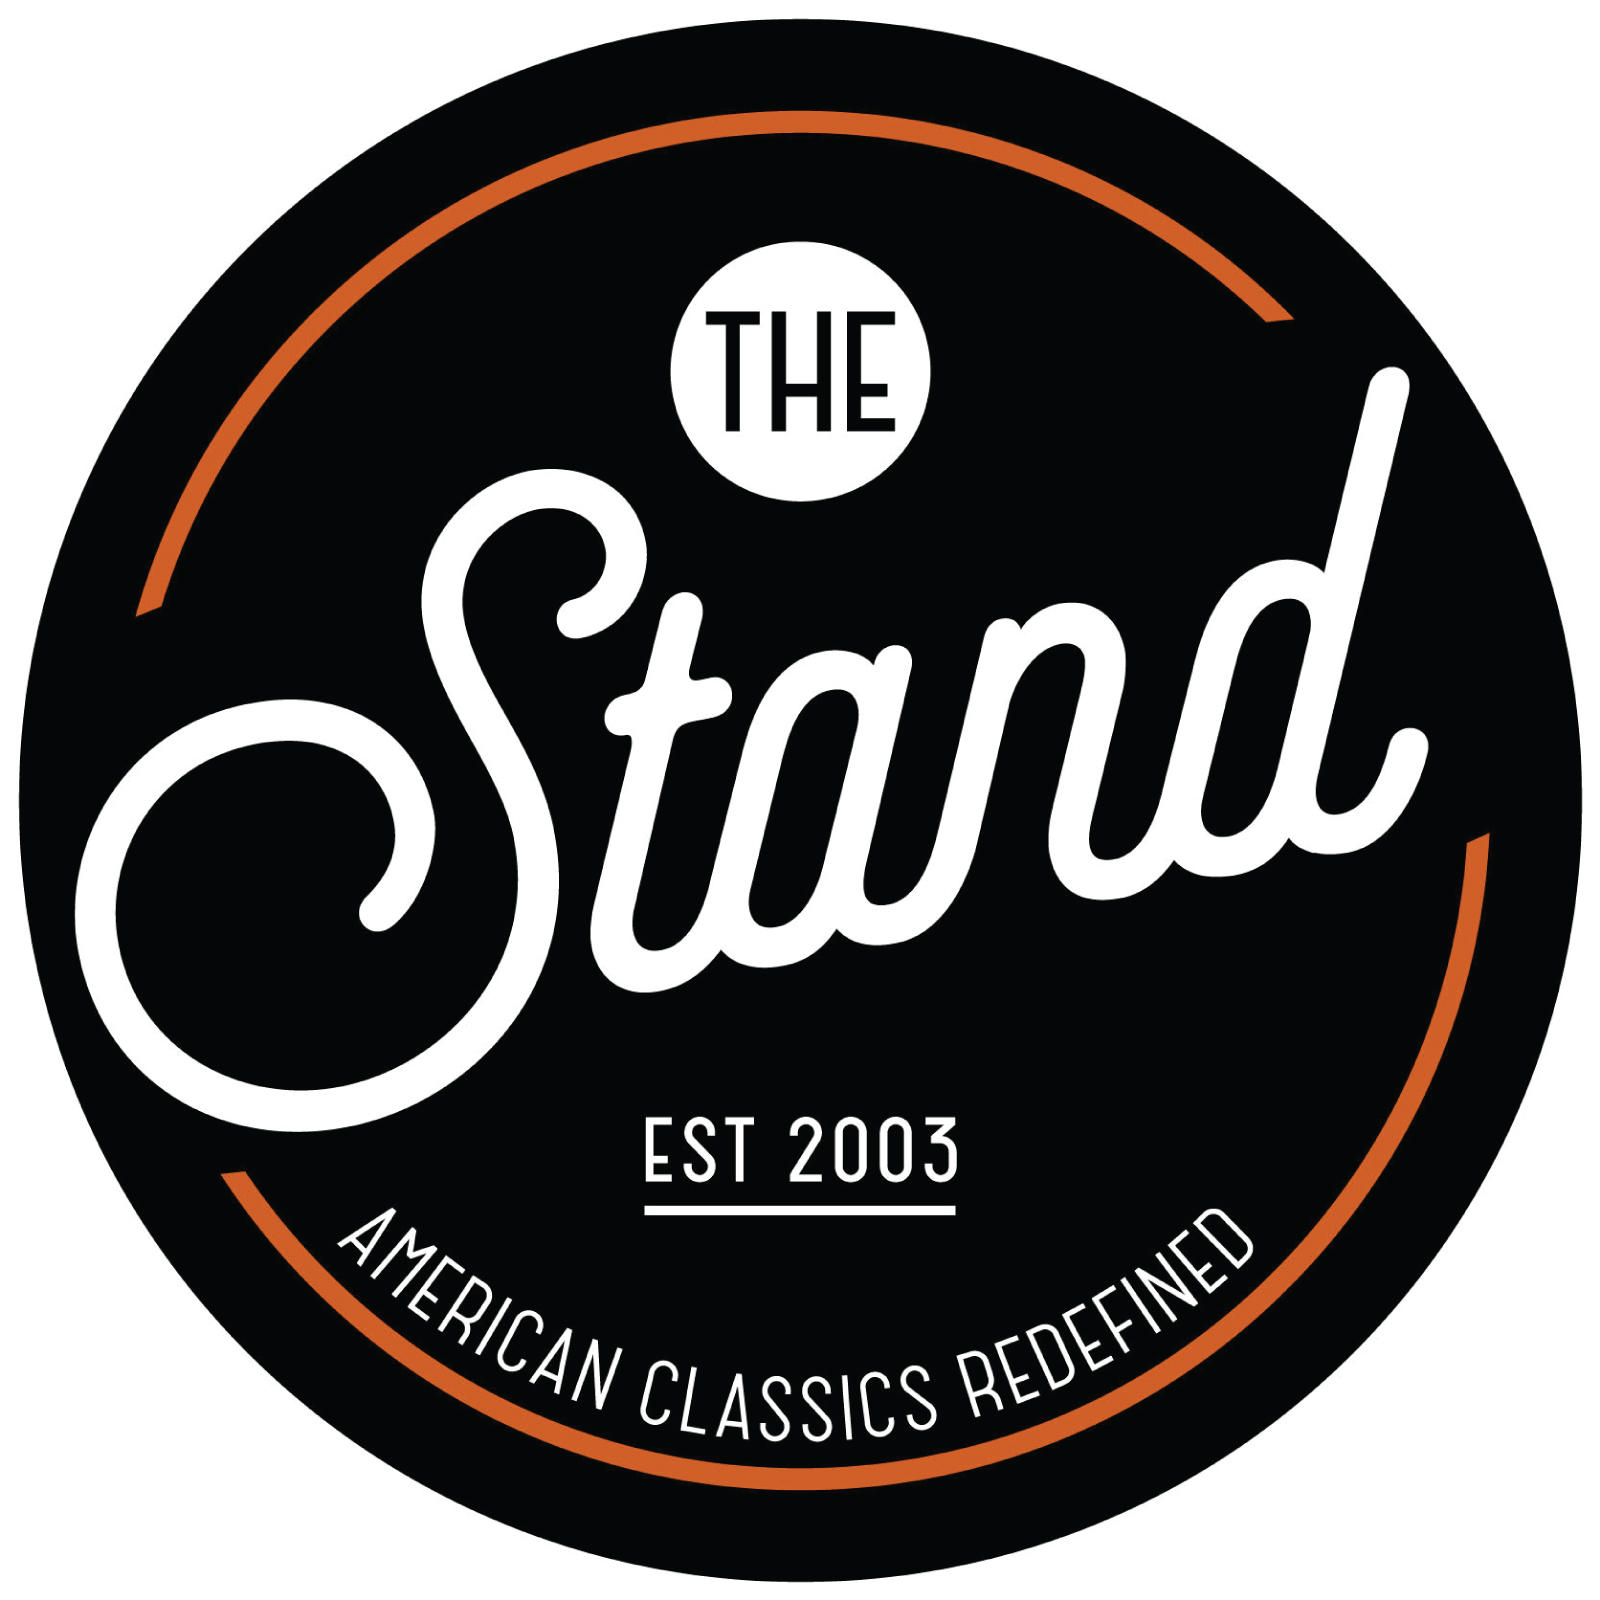 The Stand "American Classics Redefined" Photo